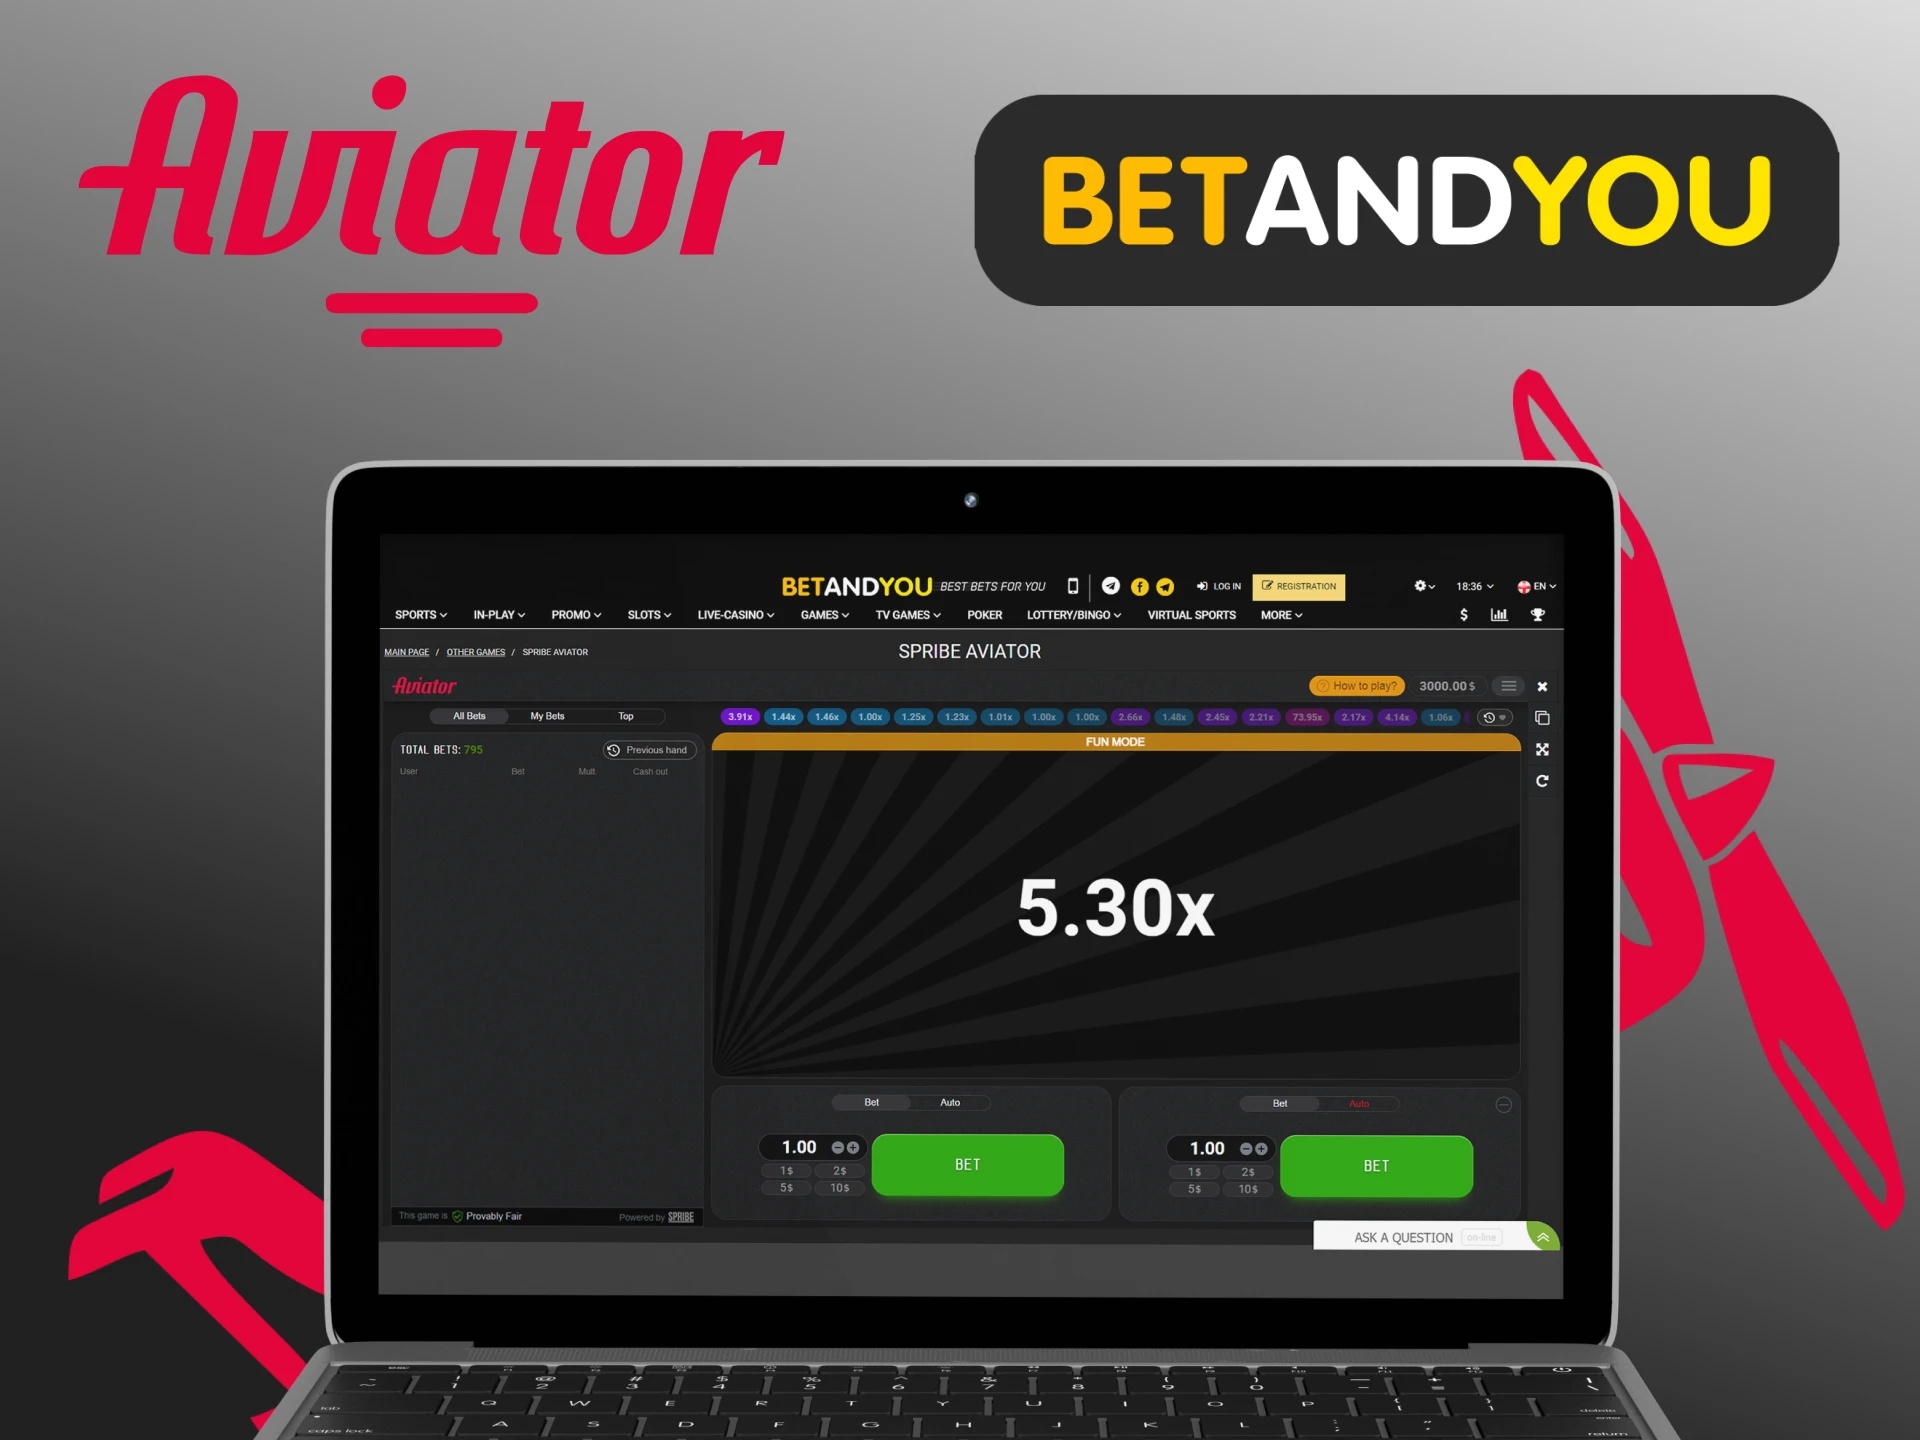 You can play the Aviator game on the Betandyou website.